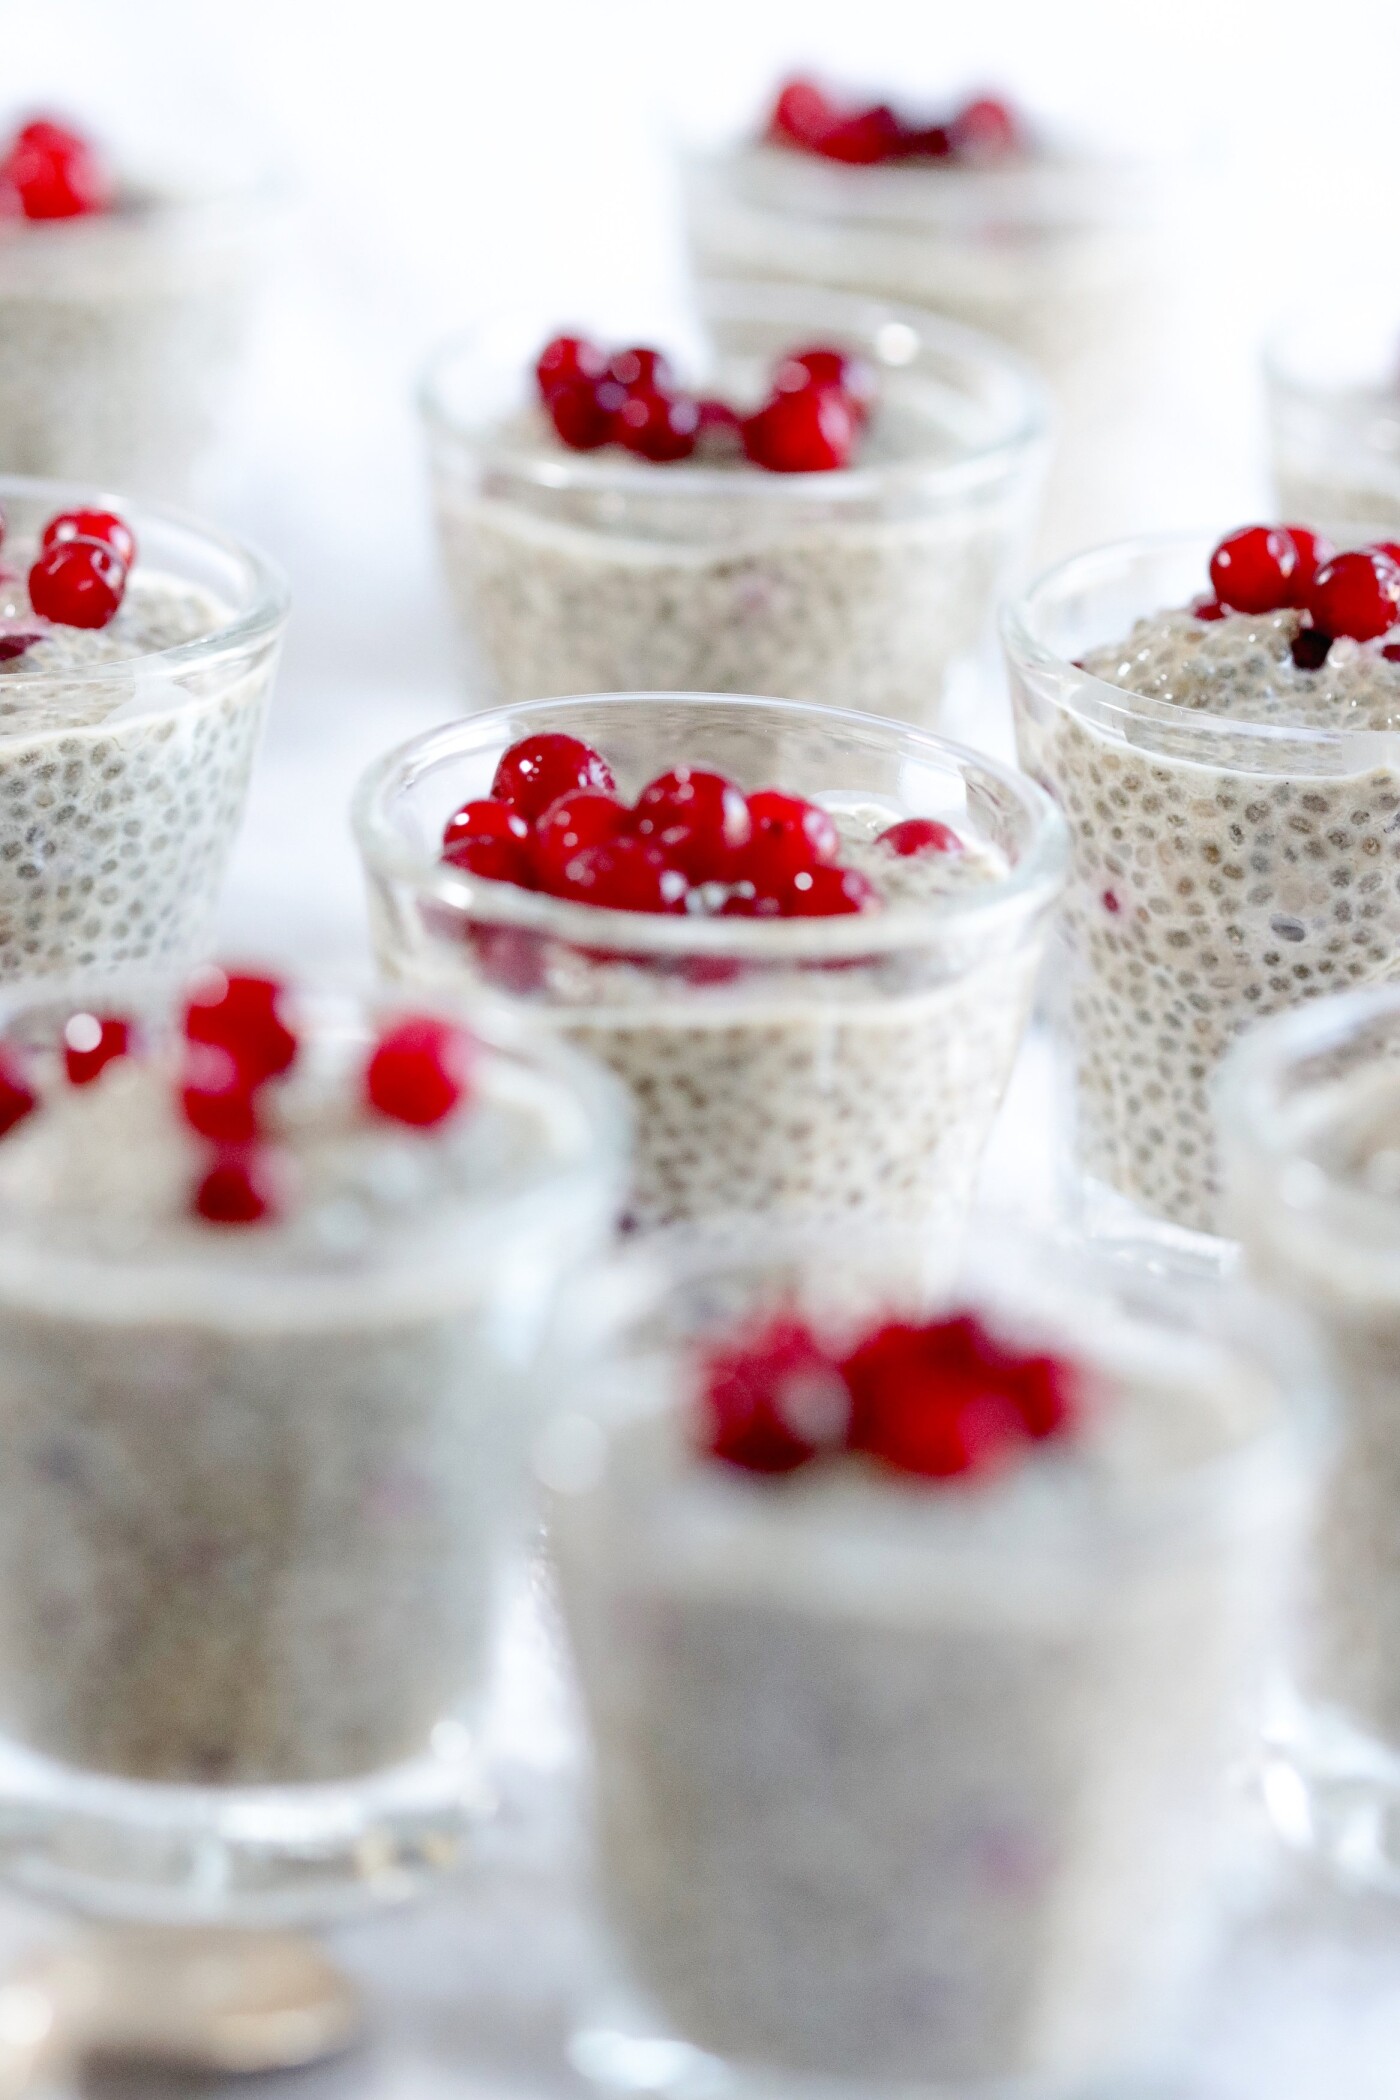  This is a Gingerbread Chia Pudding with lingonberries. Perfect for christmas breakfast or for a in between meals "mellanmål" as we say in sweden